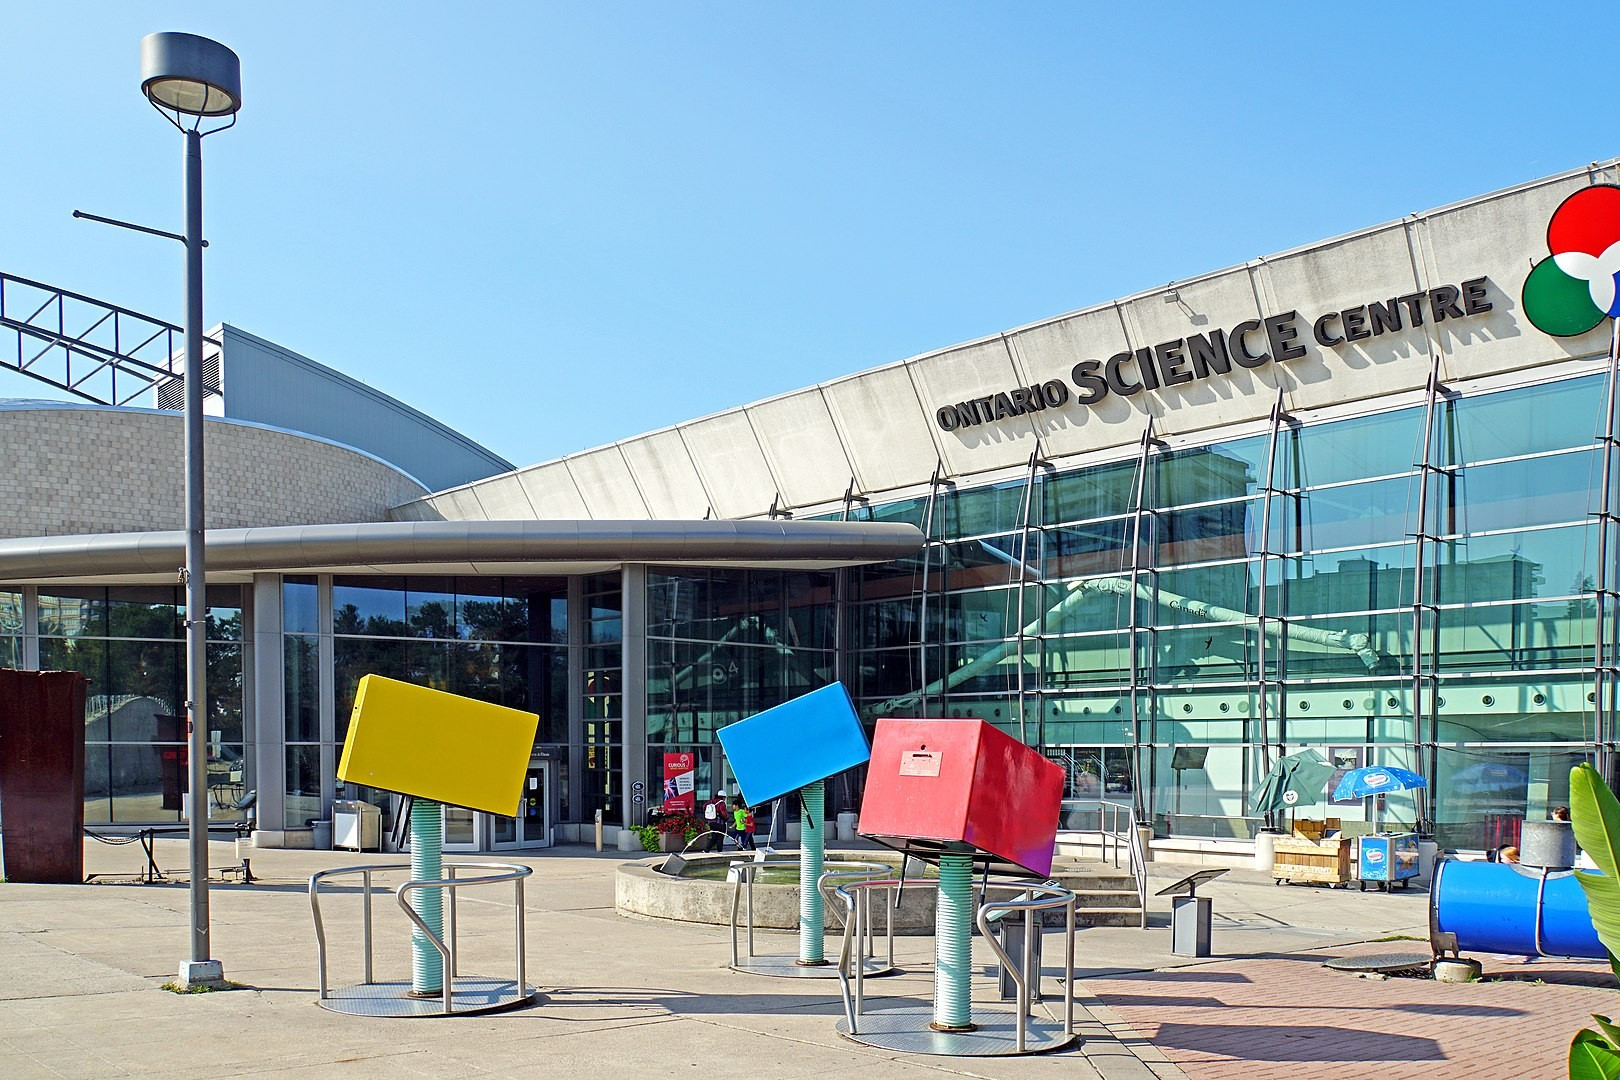 By Dennis Jarvis from Halifax, Canada - DSC00043 - Ontario Science Centre, CC BY-SA 2.0, https://commons.wikimedia.org/w/index.php?curid=68736224